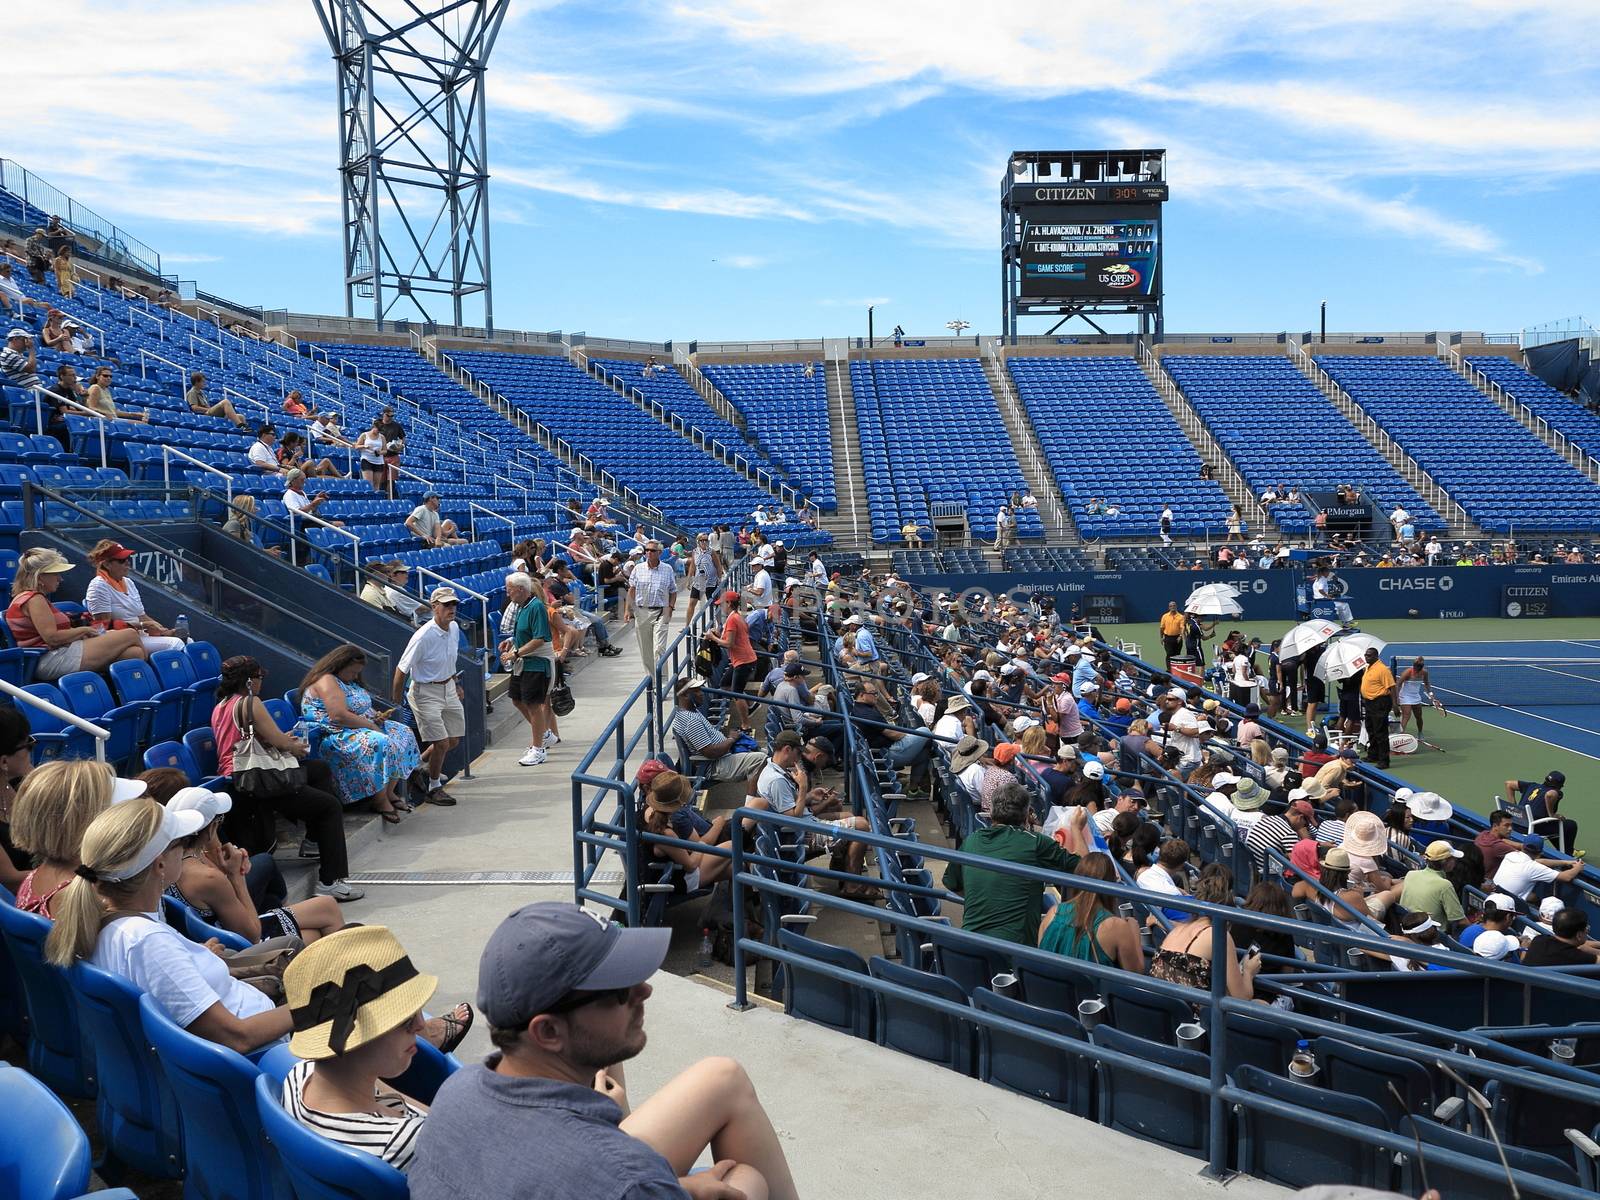 U.S. Open Tennis - Louis Armstrong Stadium by Ffooter